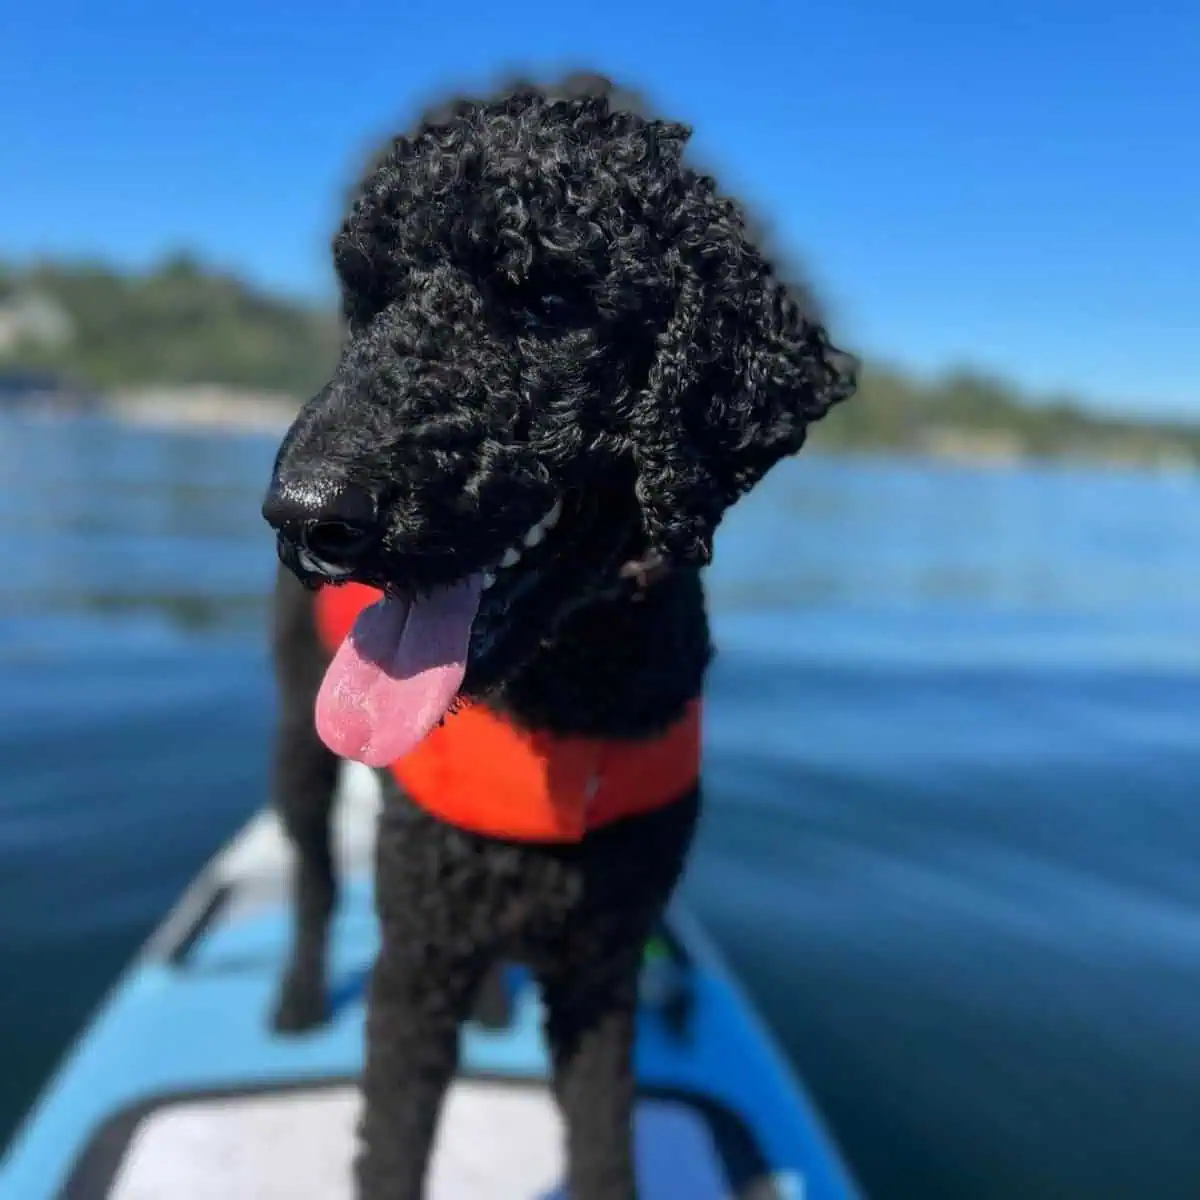 Poodle loves water activities